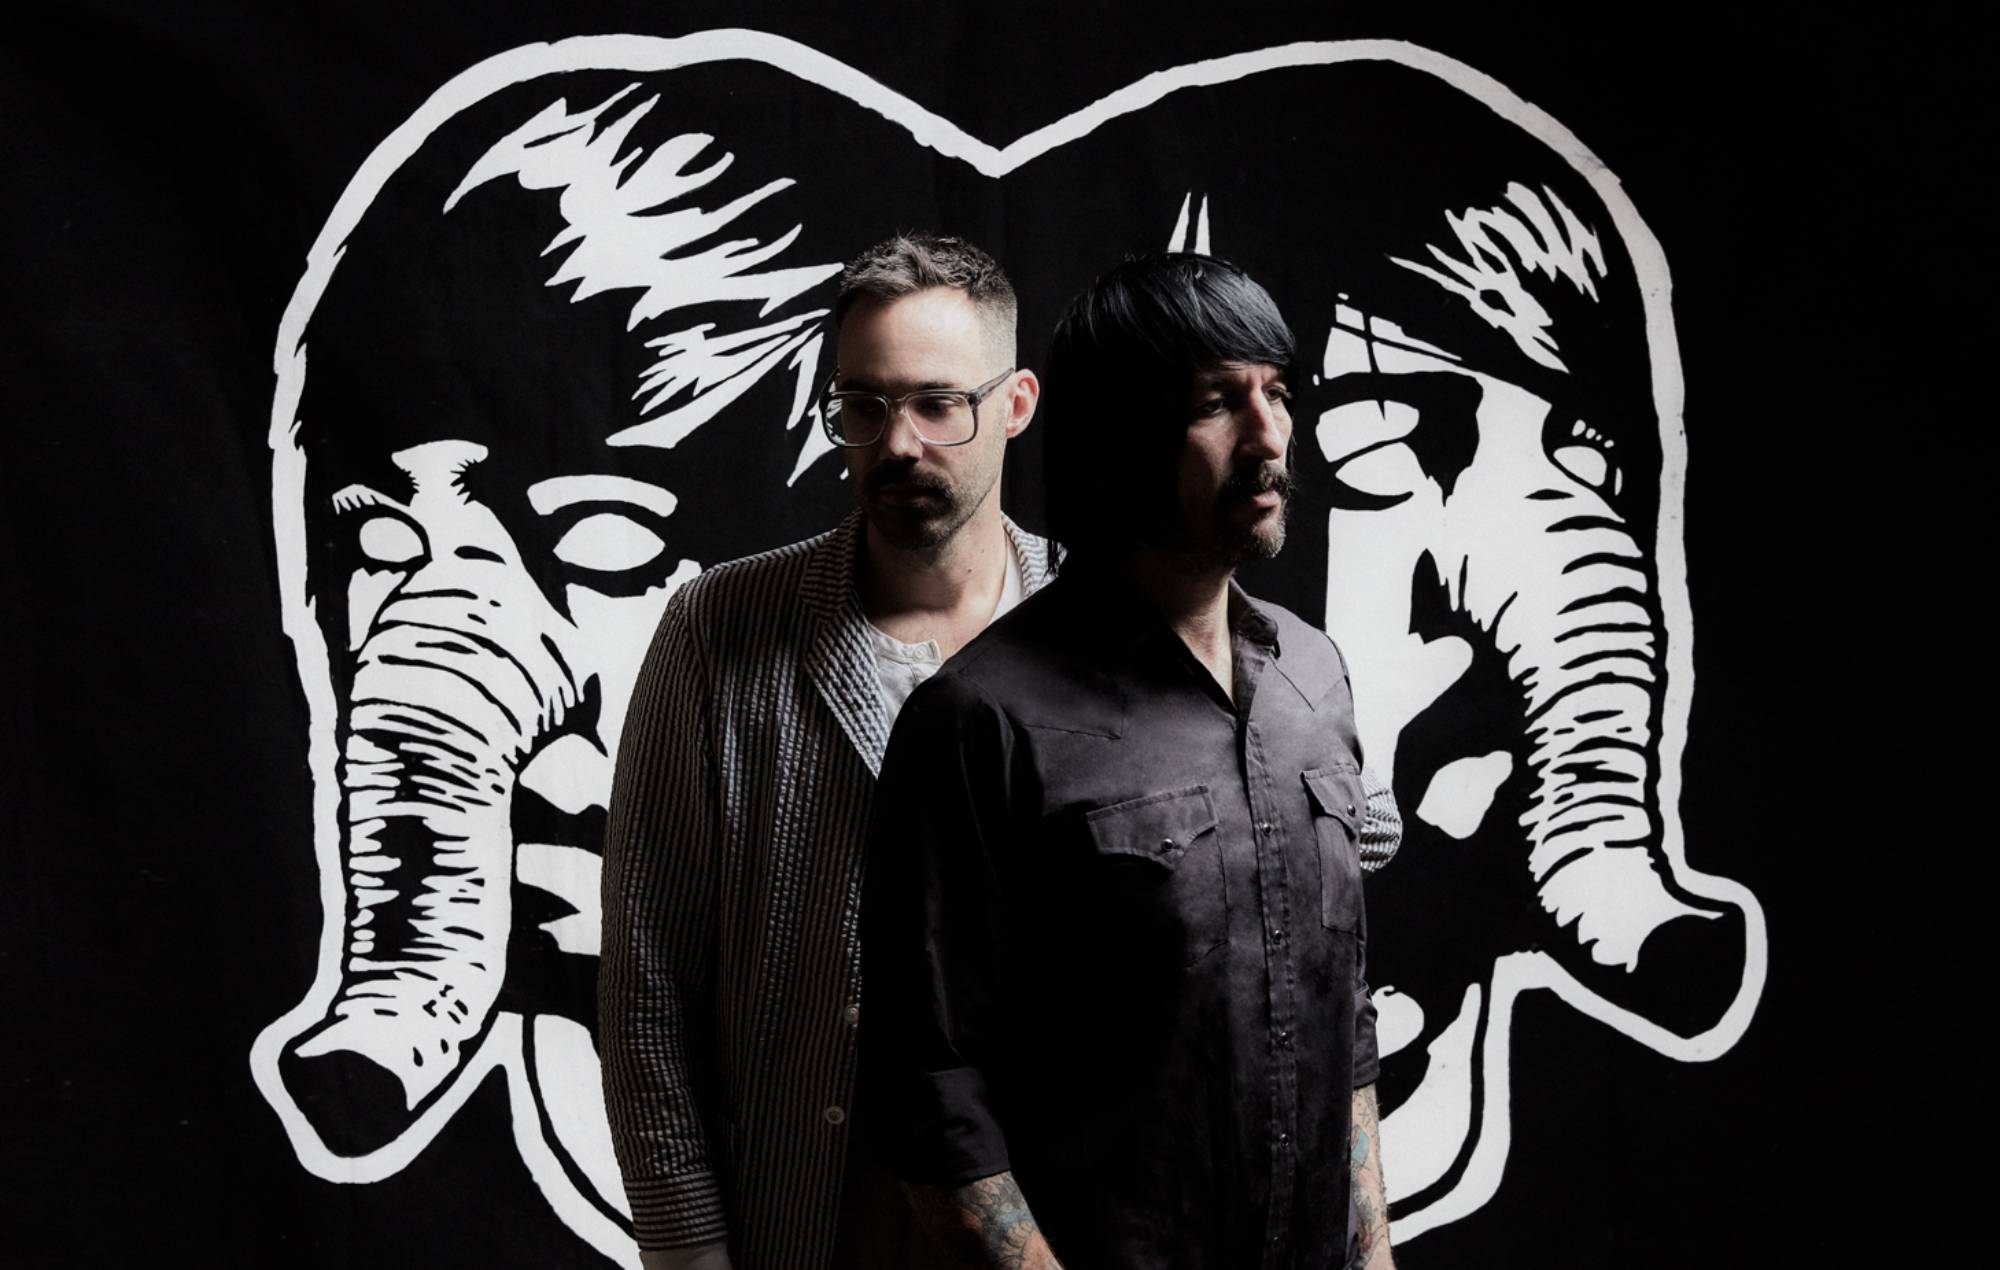 Death From Above 1979 return with dance-y single ‘One + One’ and tell us about “playful” new album ‘Is 4 Lovers’